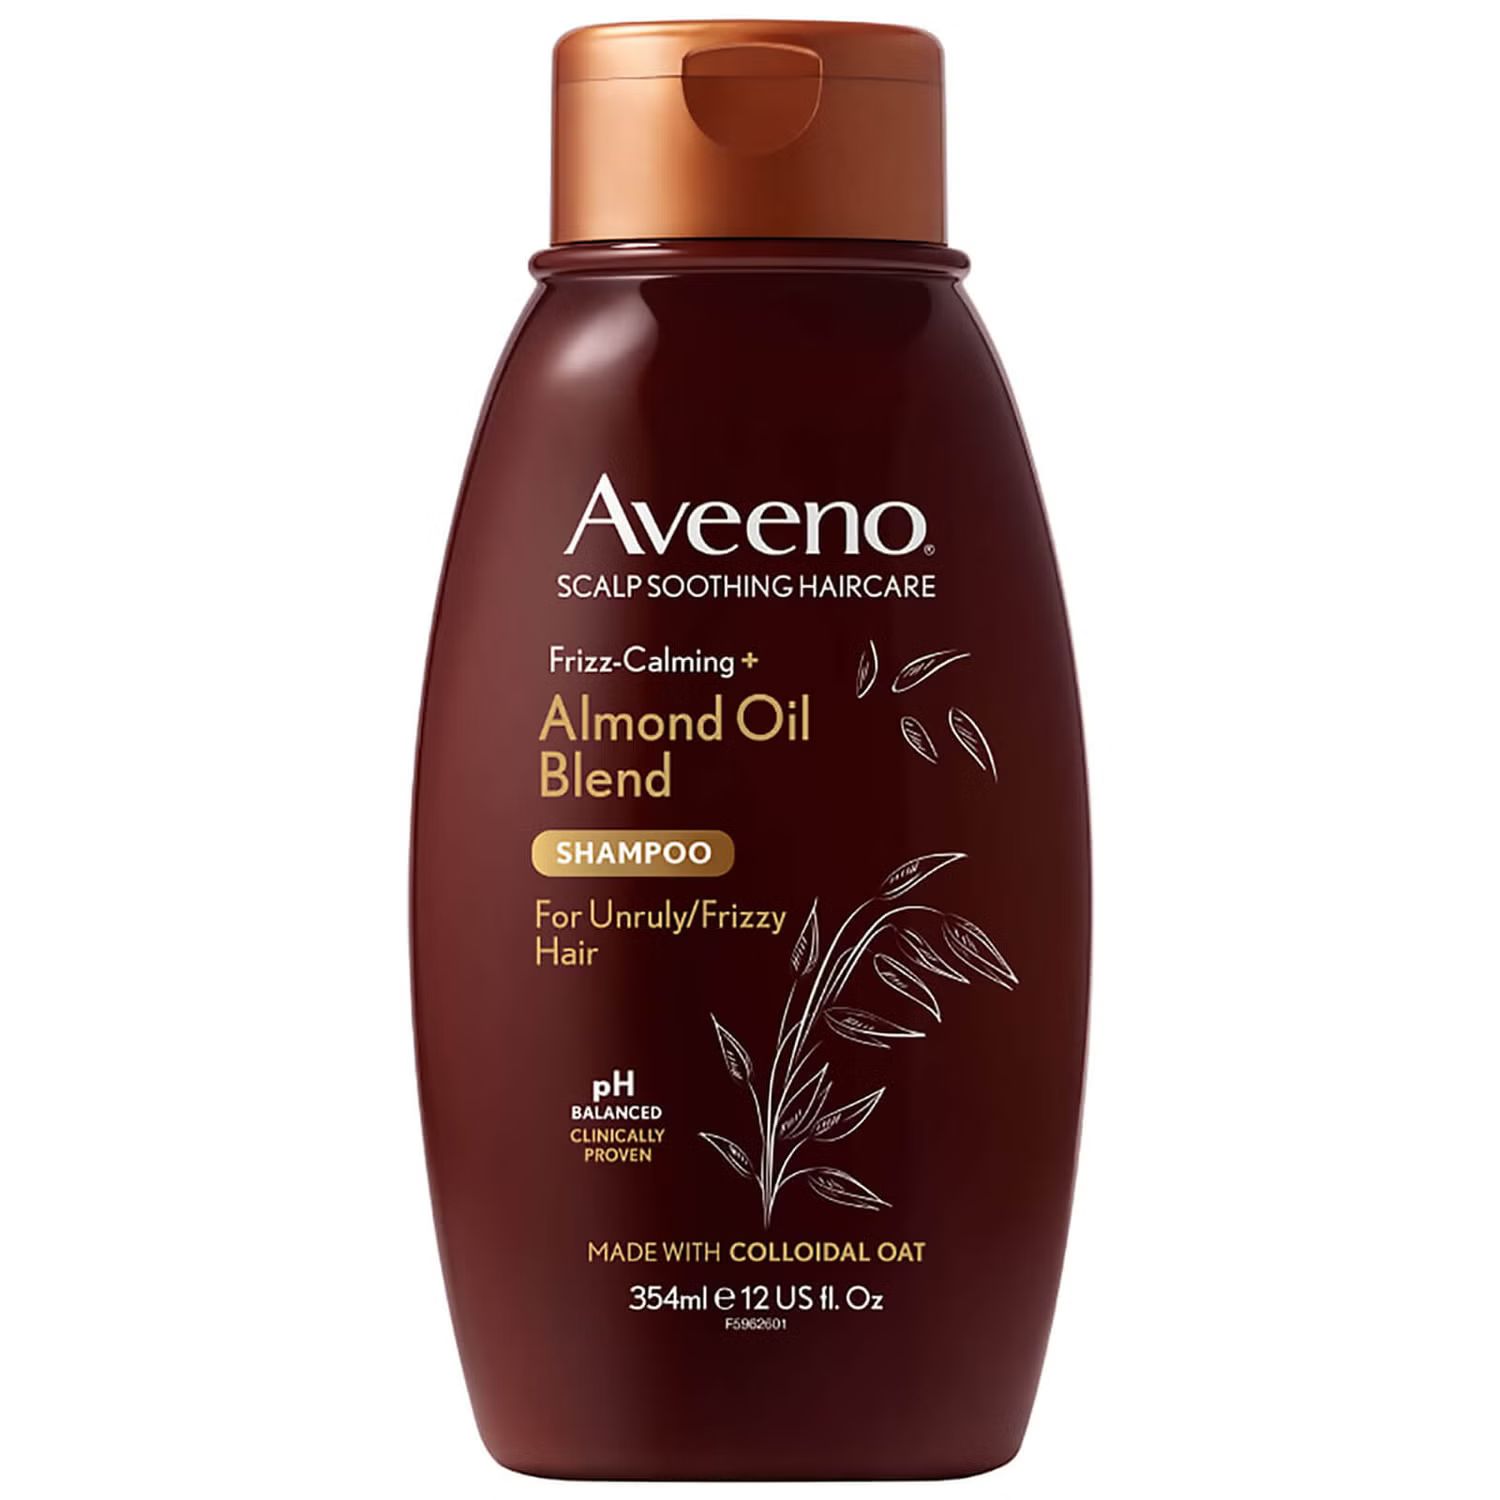 Aveeno Scalp Soothing Haircare Frizz Calming Almond Oil Blend Shampoo 354ml | Look Fantastic (ROW)